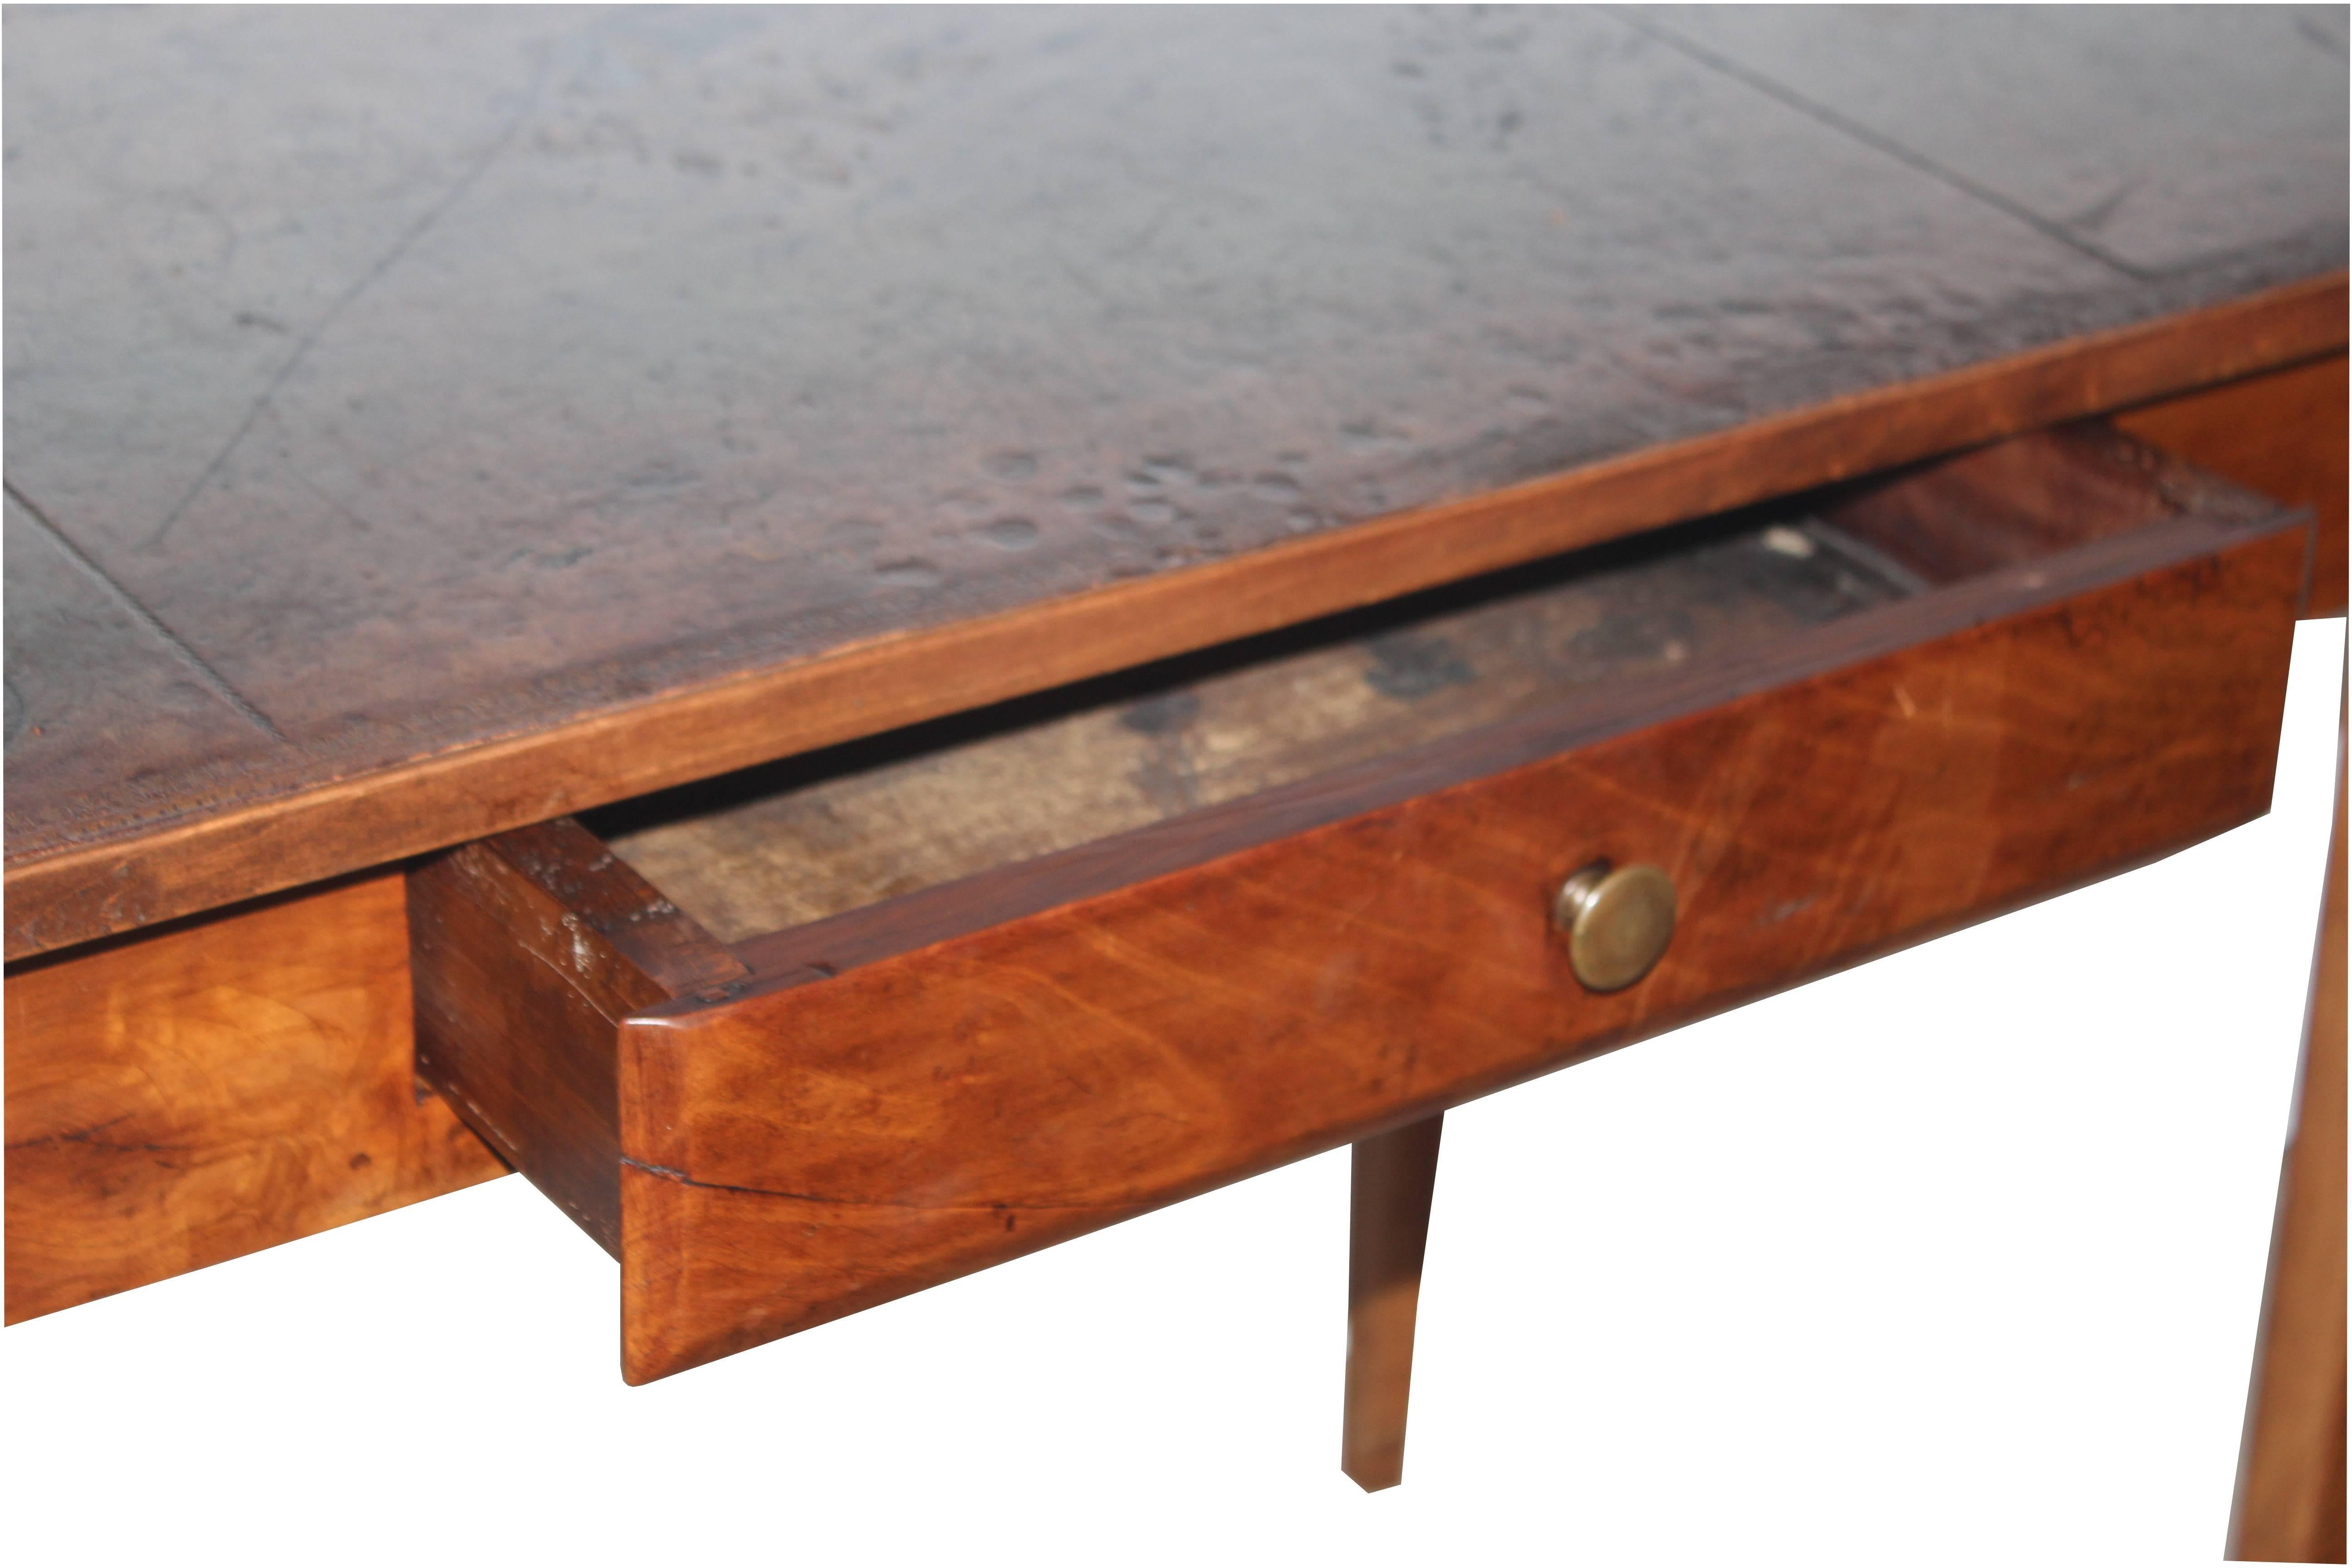 19th century leather top writing table with a single drawer.